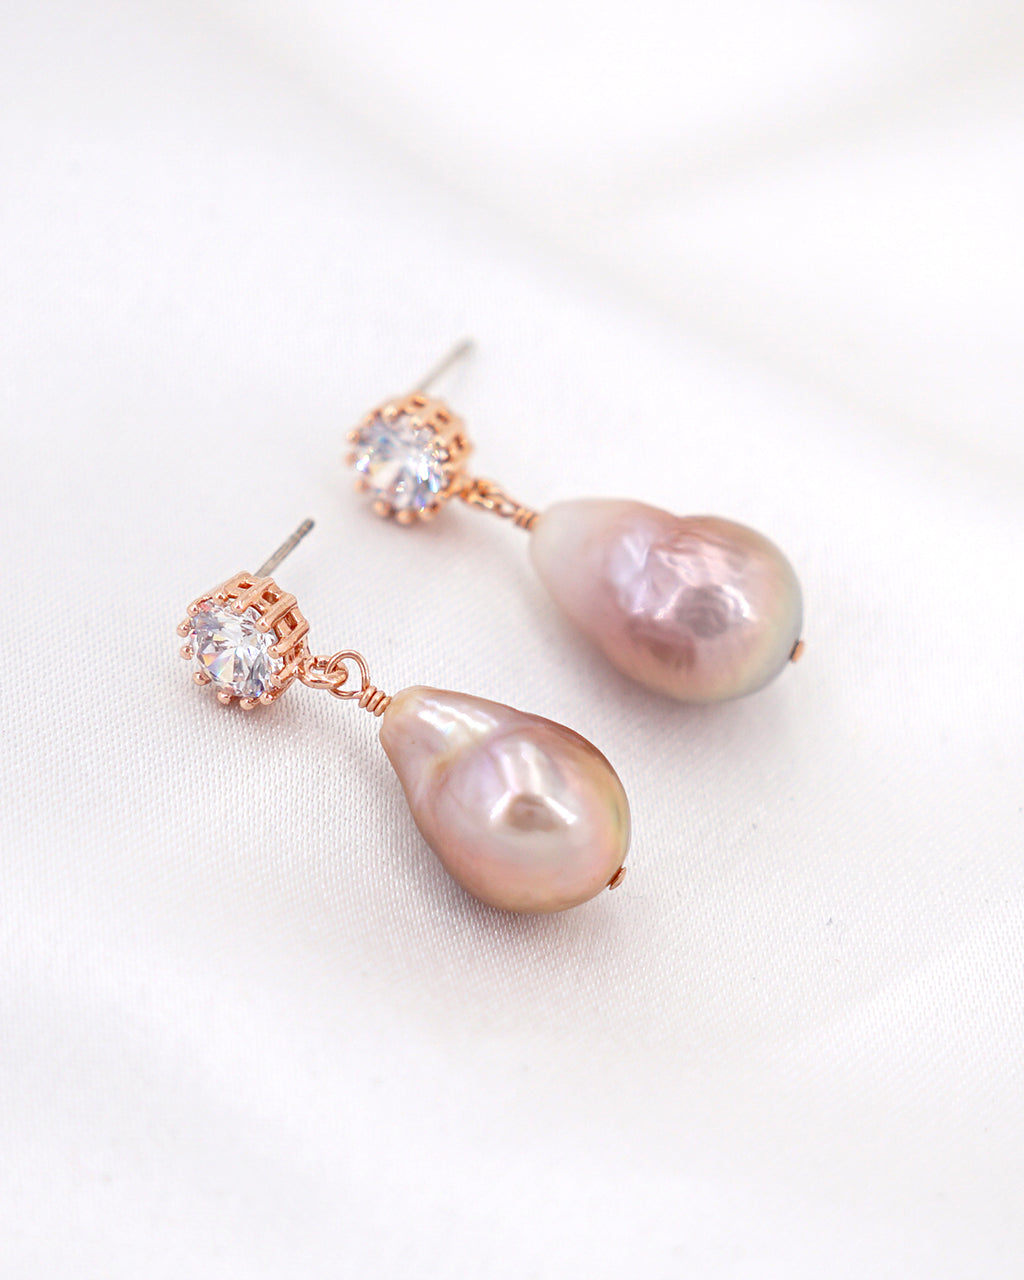 Purple Baroque Pearl Earrings - Round Sparkle Petite - Wedding Bridal Jewelry for Brides and Bridesmaids | Singapore